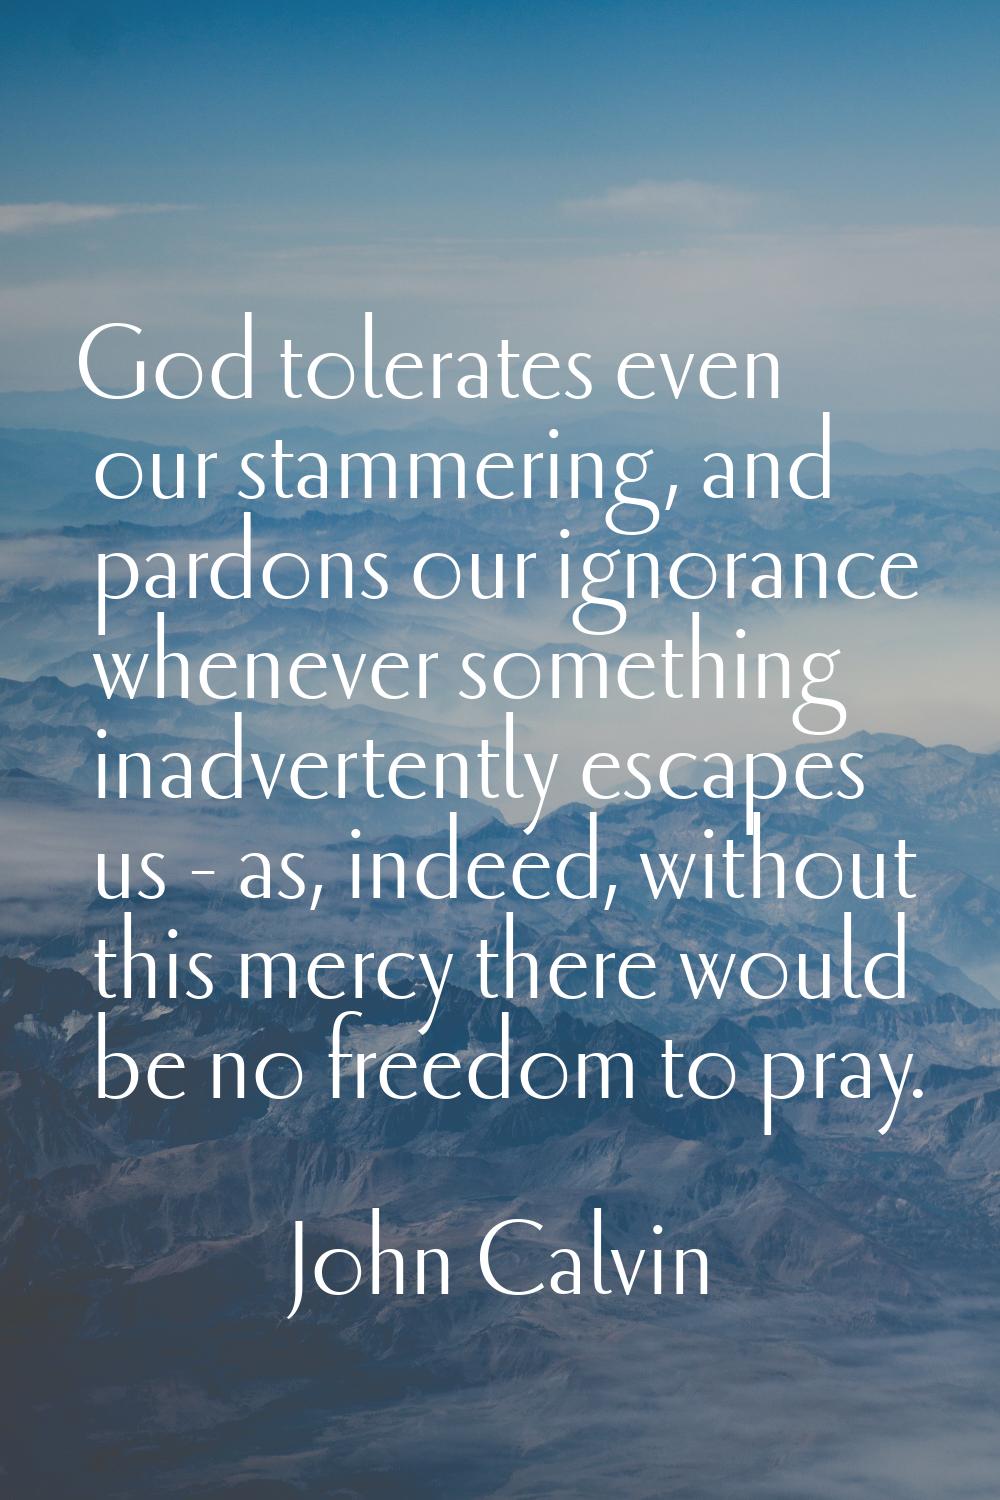 God tolerates even our stammering, and pardons our ignorance whenever something inadvertently escap